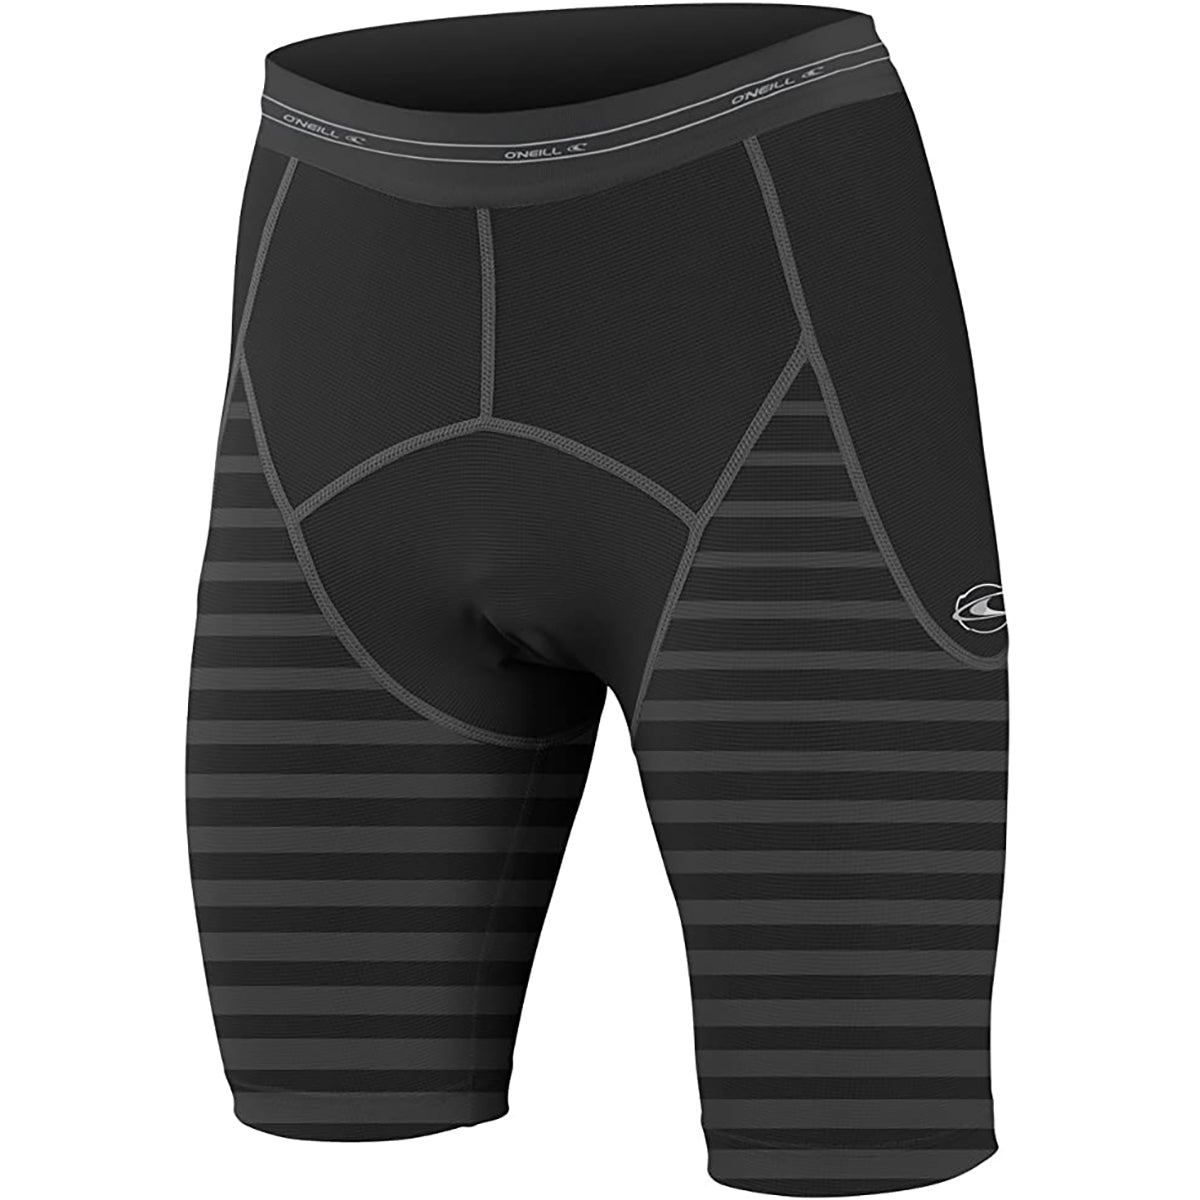 O'Neill UV Sun Protection O'Zone Comp Men's Short Wetsuit - Black/Silver/Gold